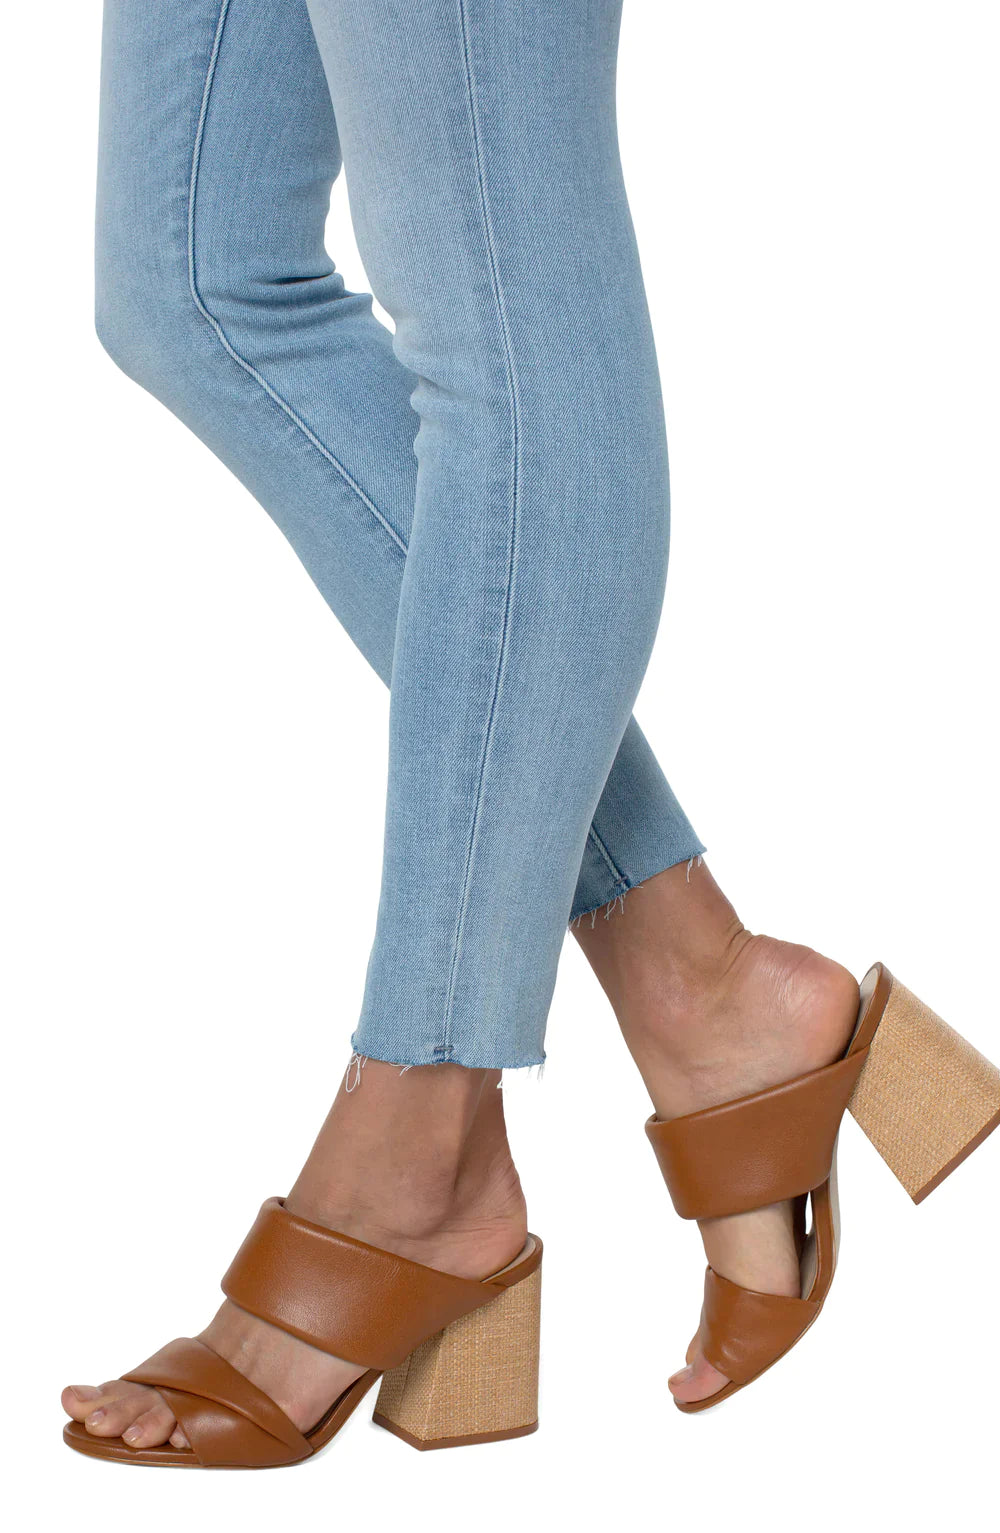 Abby High-Rise Ankle Skinny Jean - Madison's Niche 